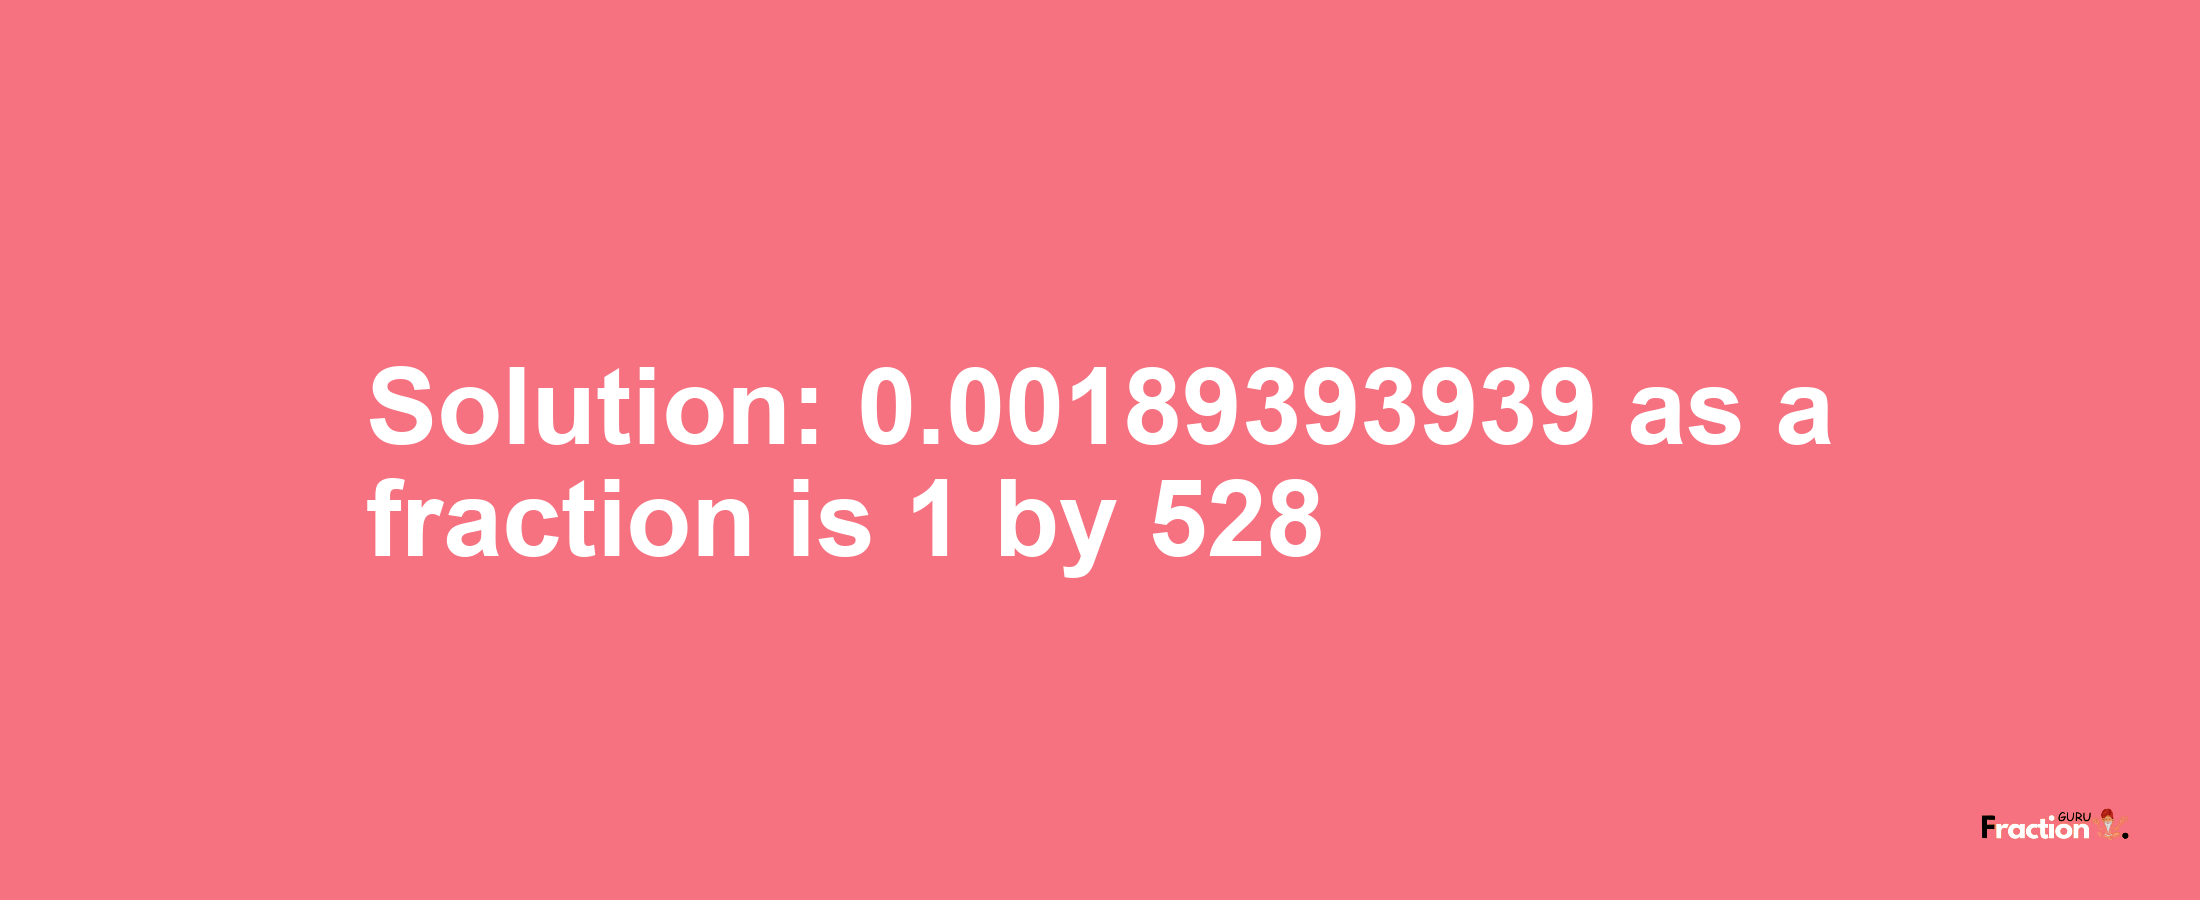 Solution:0.00189393939 as a fraction is 1/528